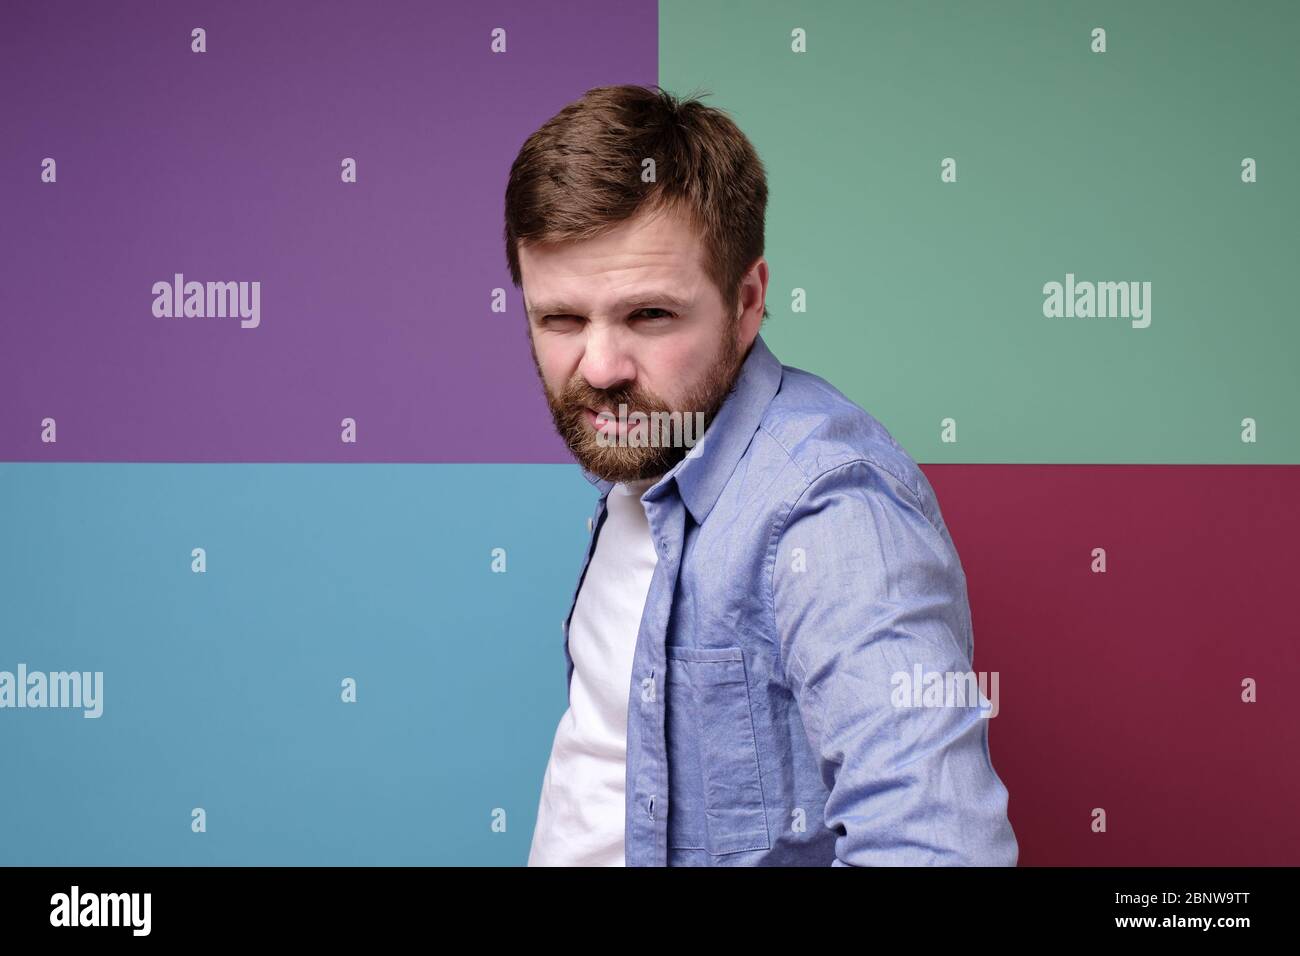 Angry, dangerous bearded man with a impudent squint. Stock Photo